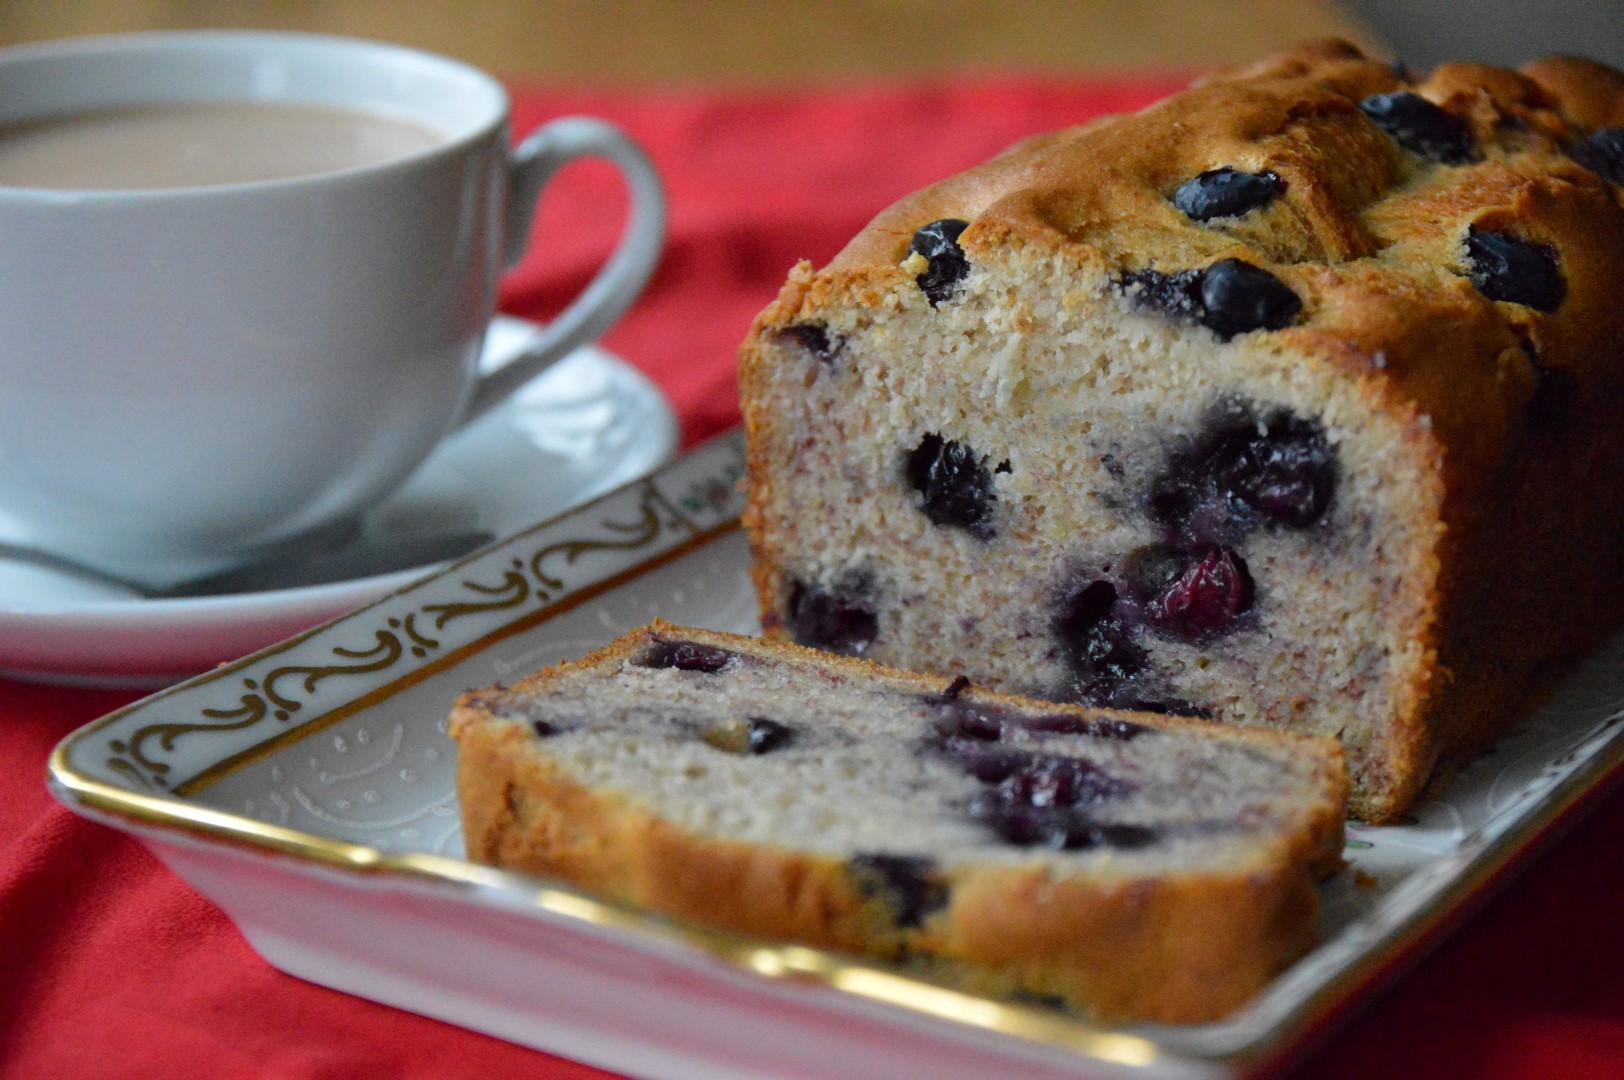 Blueberry tea loaf - vegan, gluten-free and featured in the Metro, this tea loaf is always a big hit! www.intolerantgourmand.com